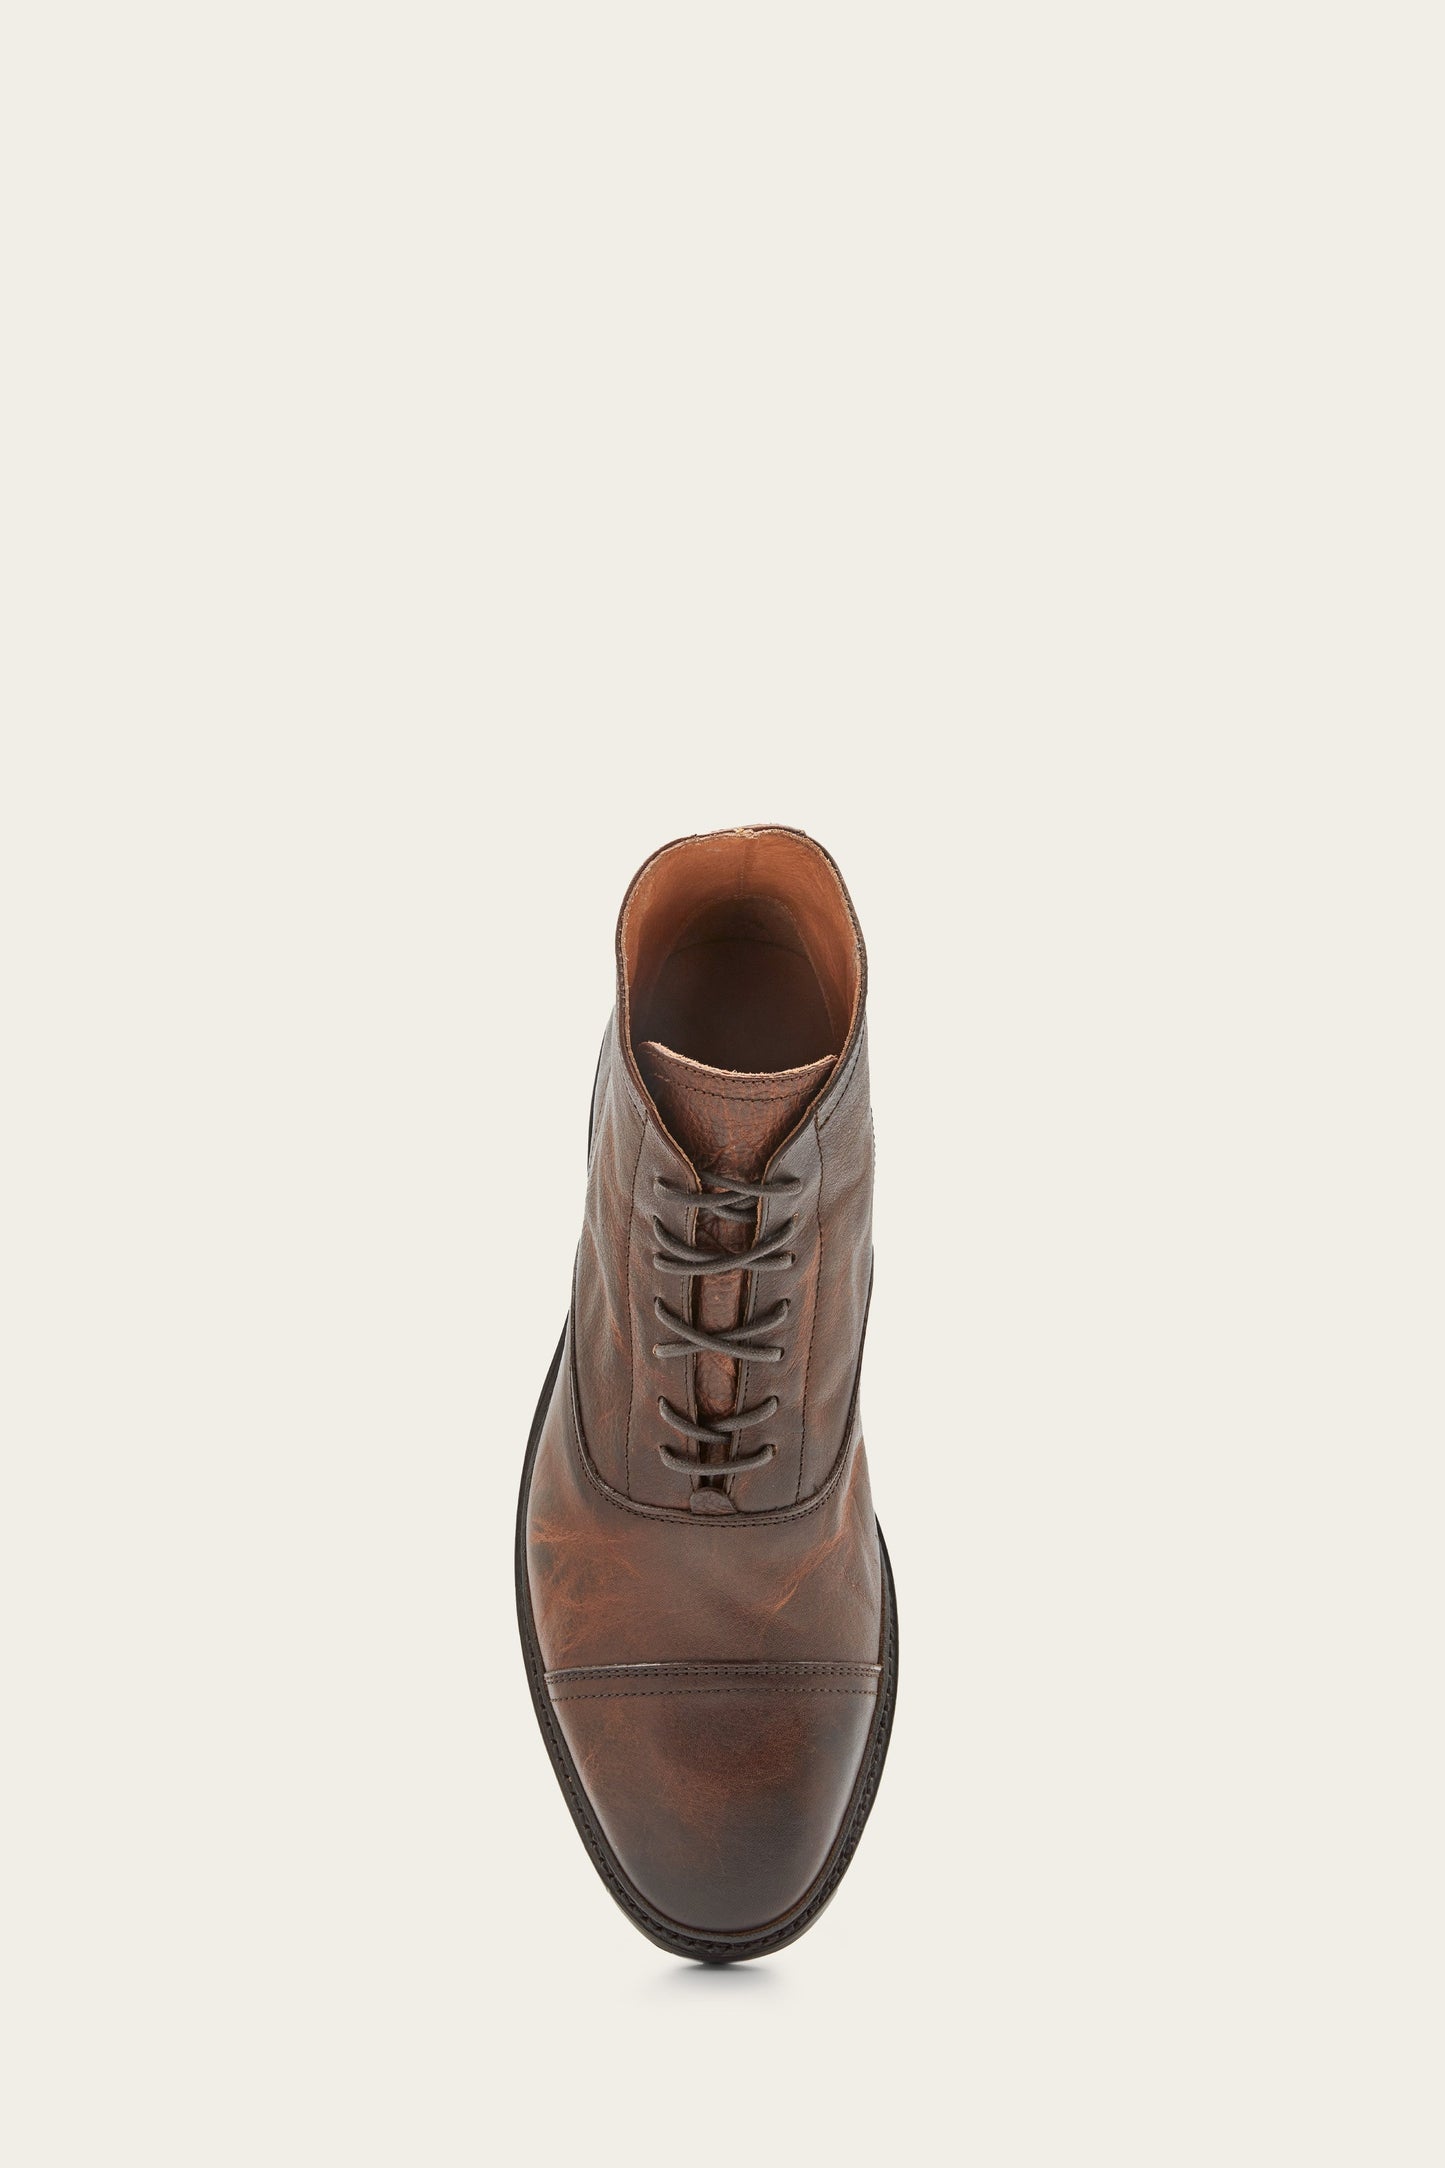 Paul Lace Up - Walnut - Top Down